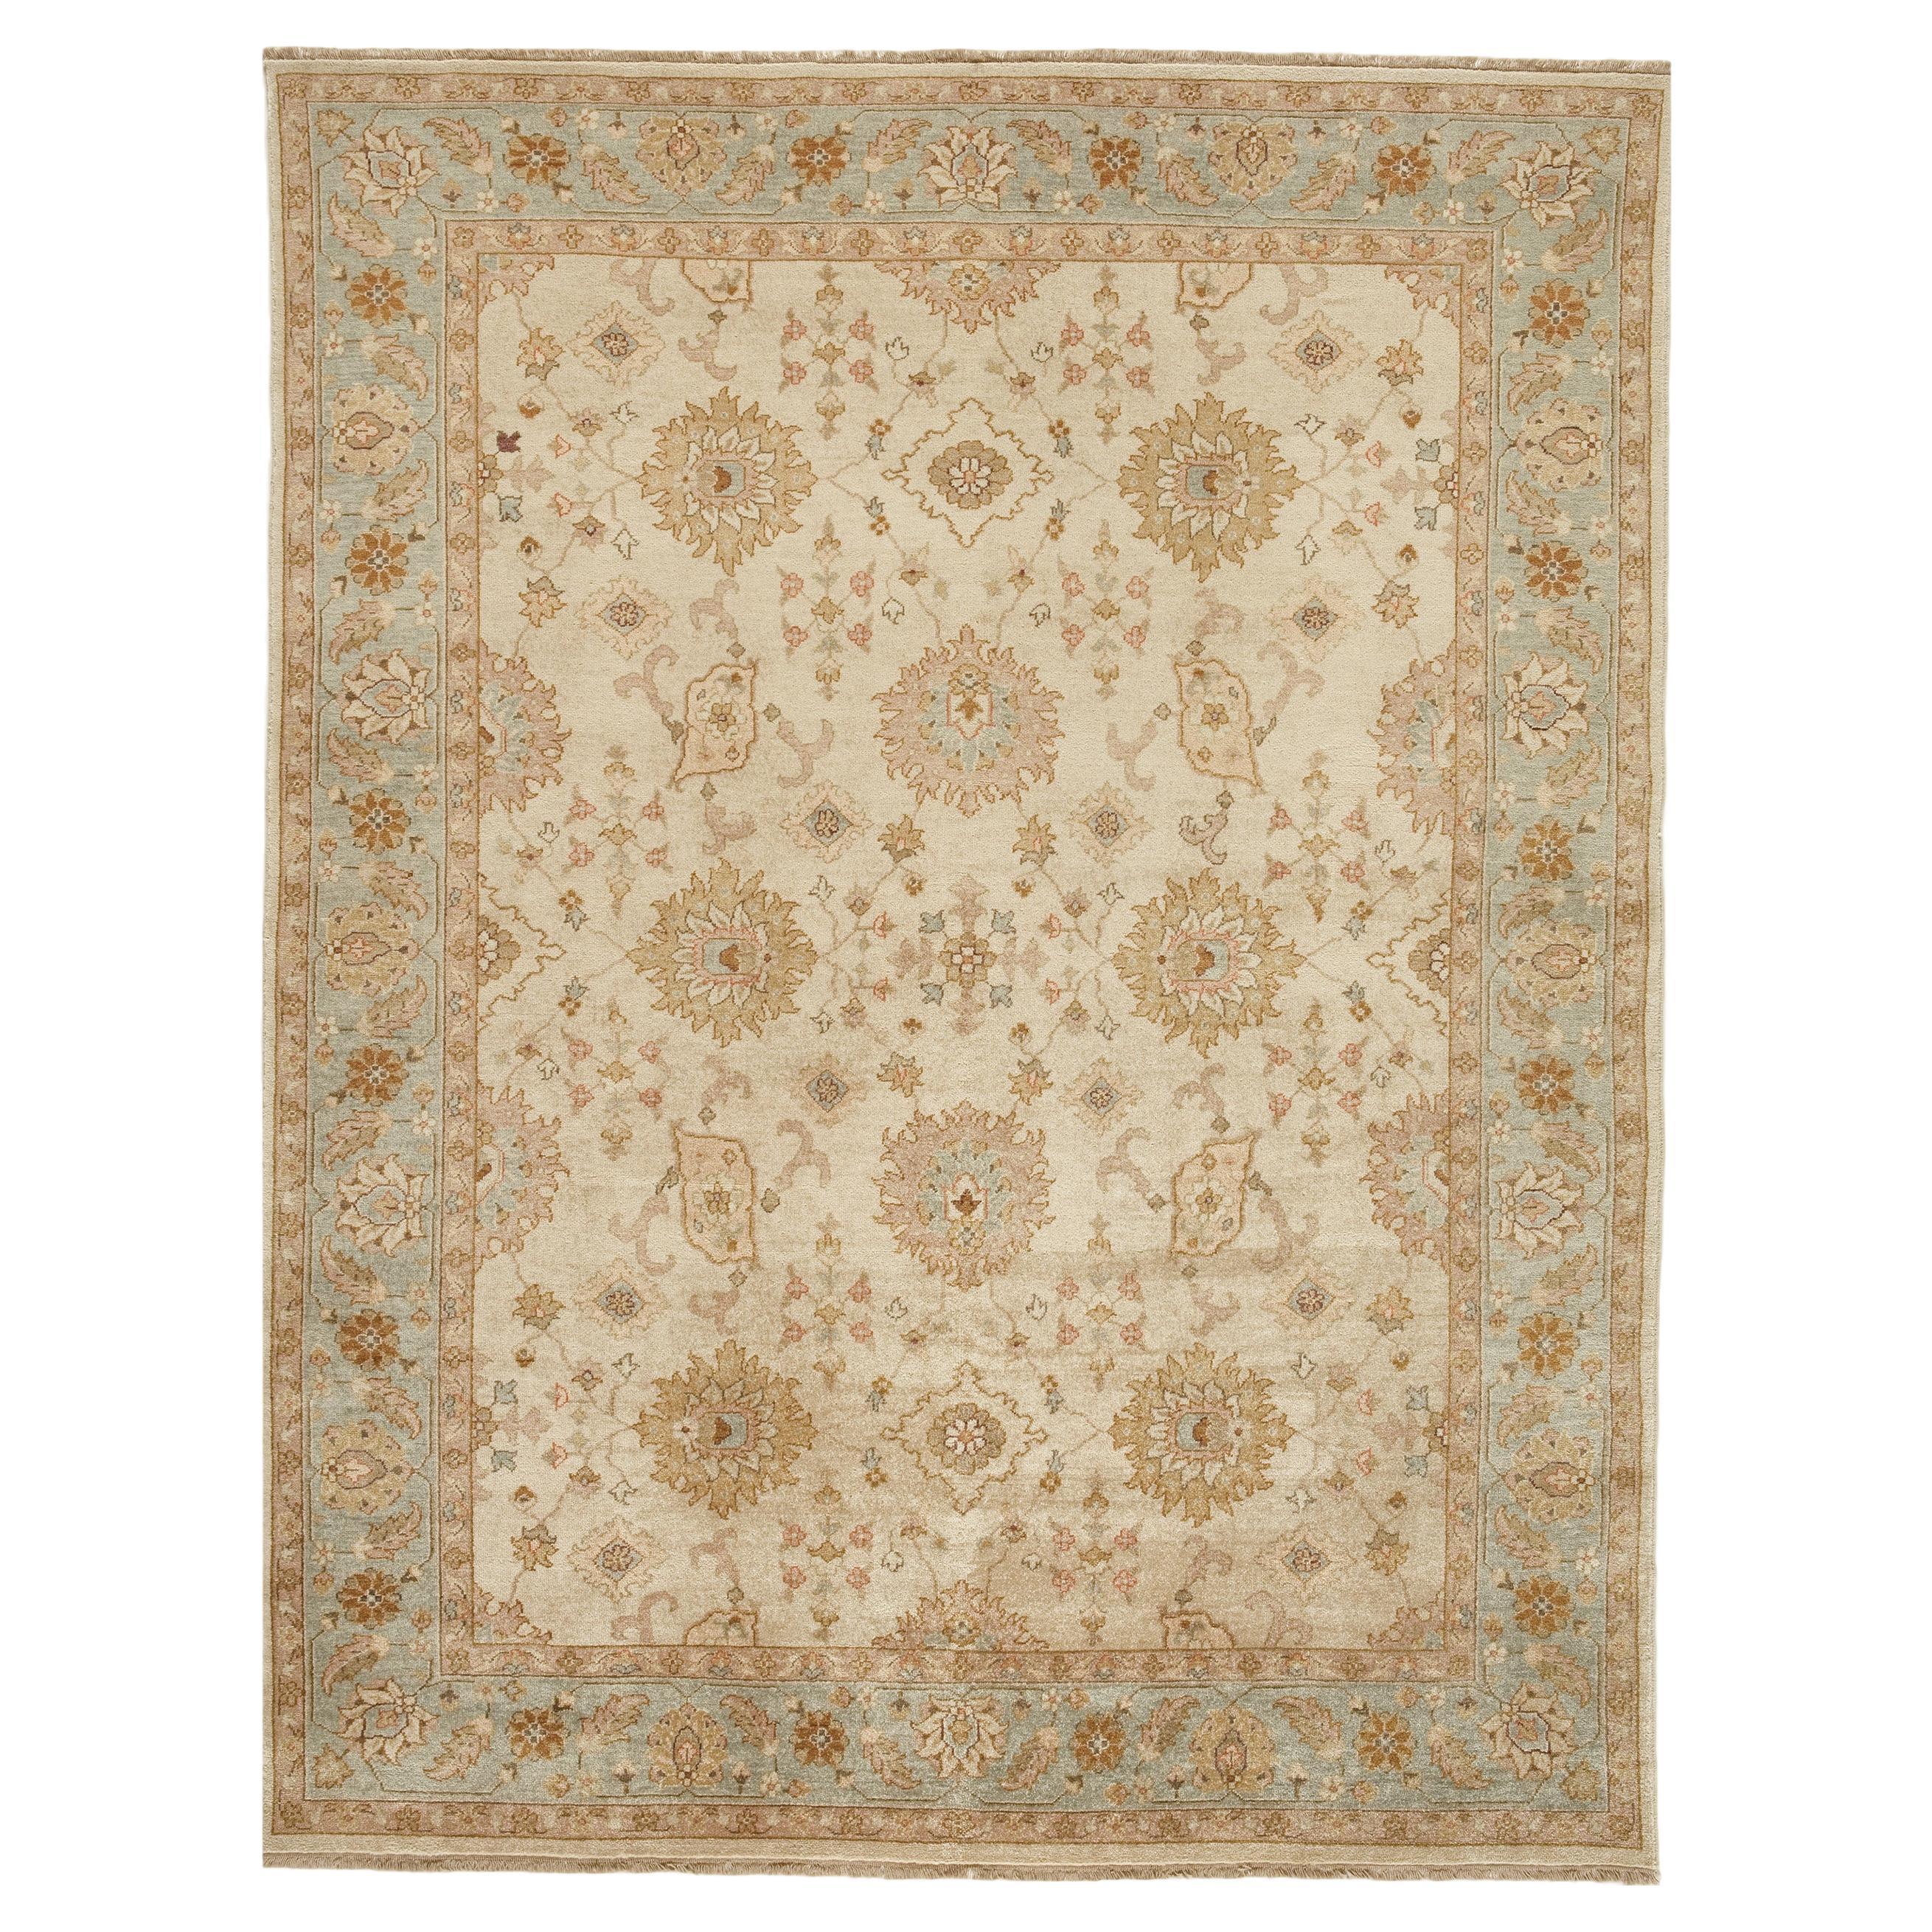 Luxury Traditional Hand-Knotted Ivory/Seafoam 10x14 Rug